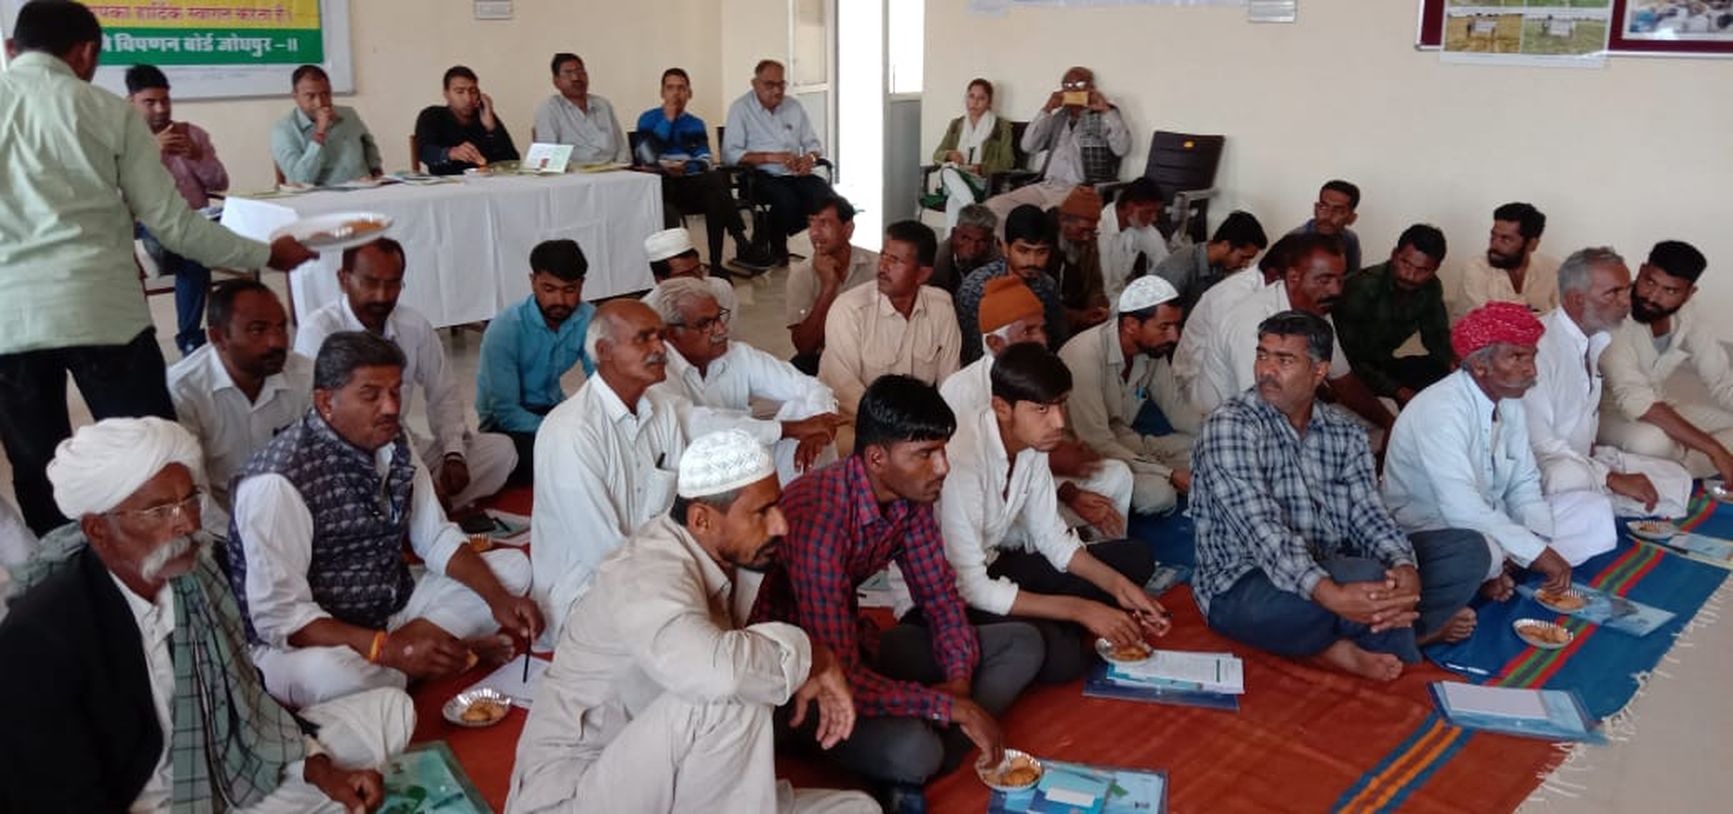 35 farmers trained Agricultural Marketing Board in pokhran